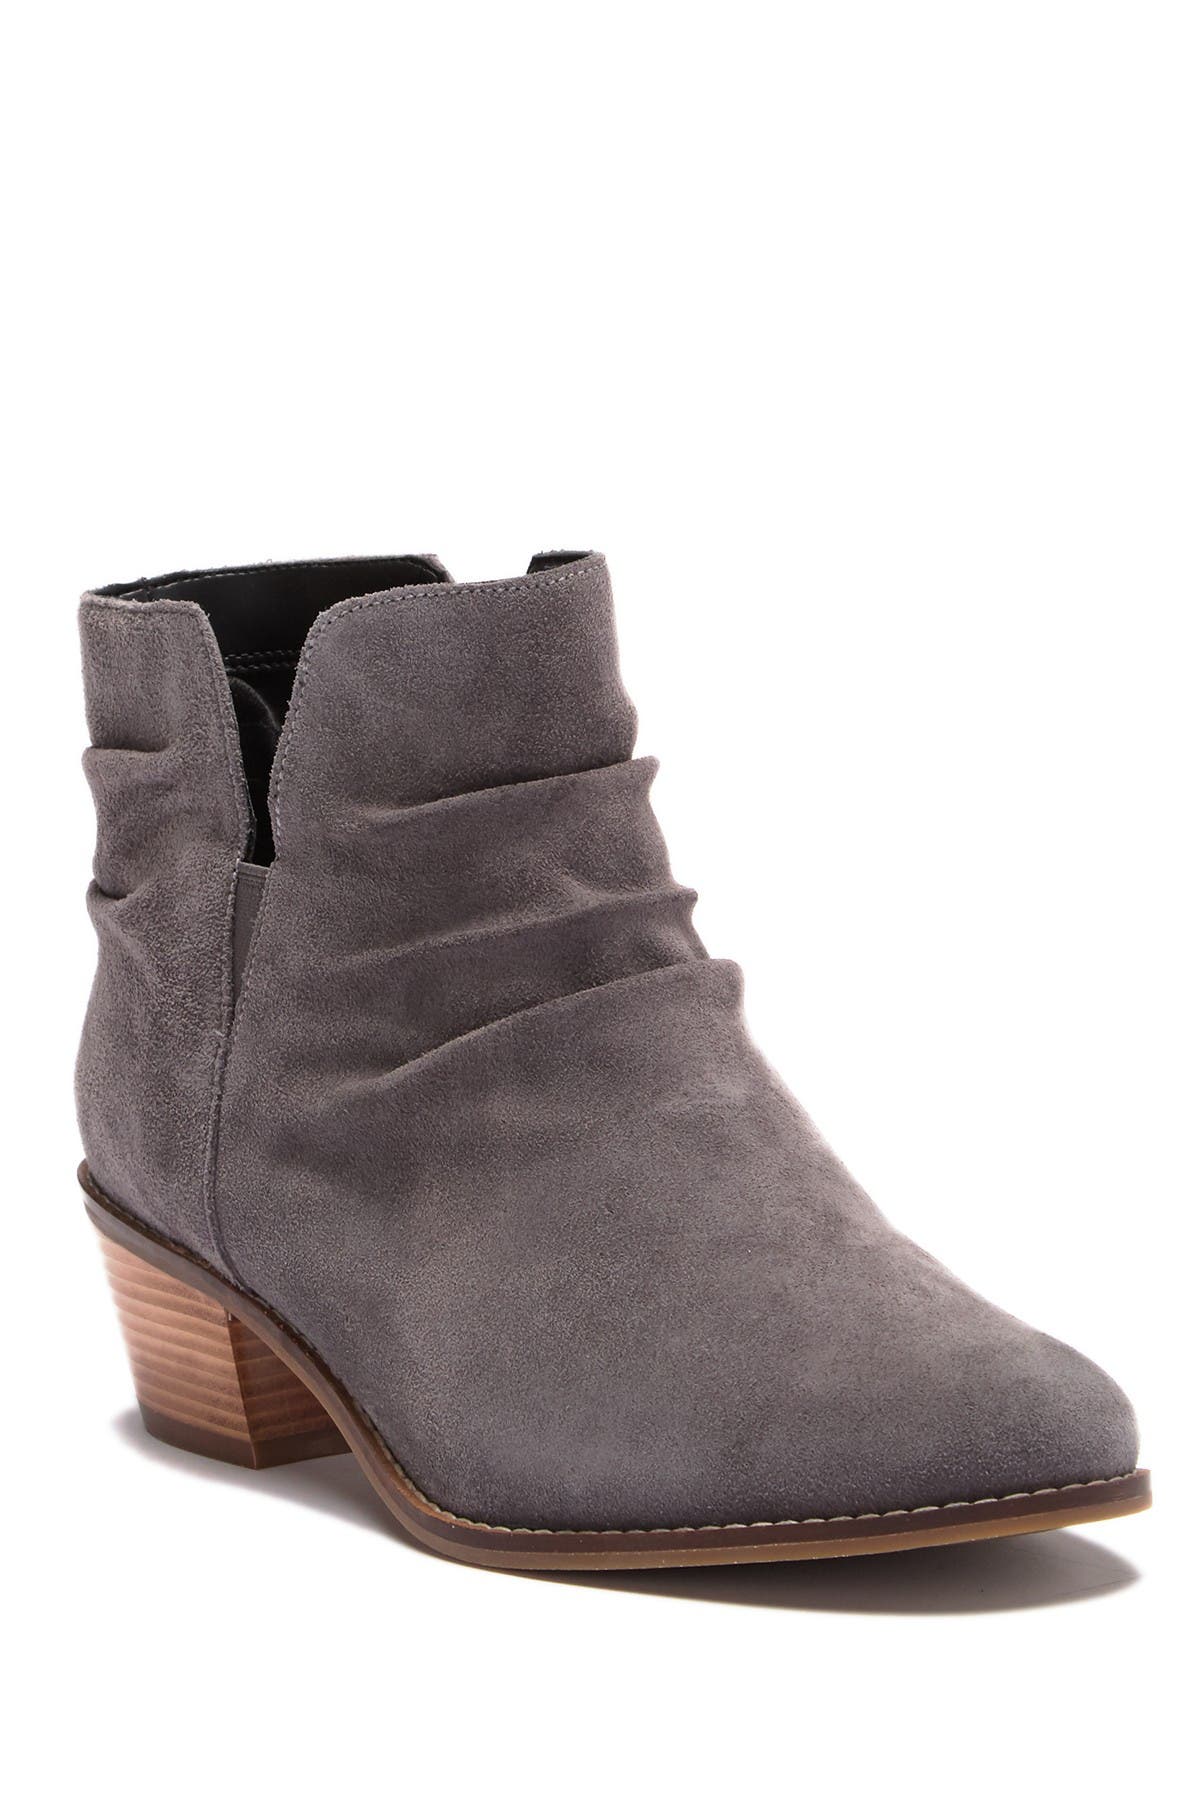 Cole Haan | Alayna Slouch Suede Bootie 